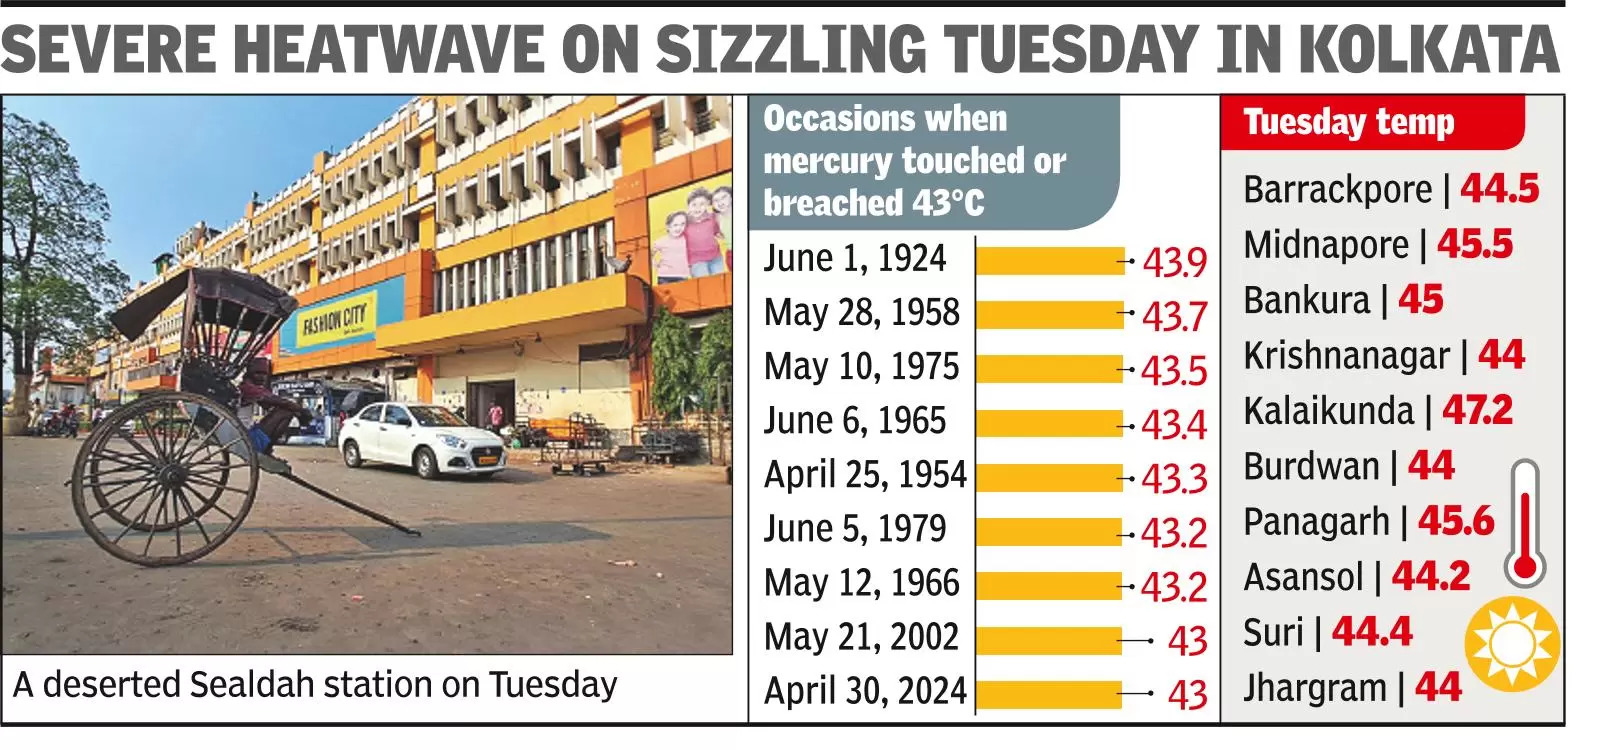 Melting pot: At 43°C, city’s max temp nears all-time high